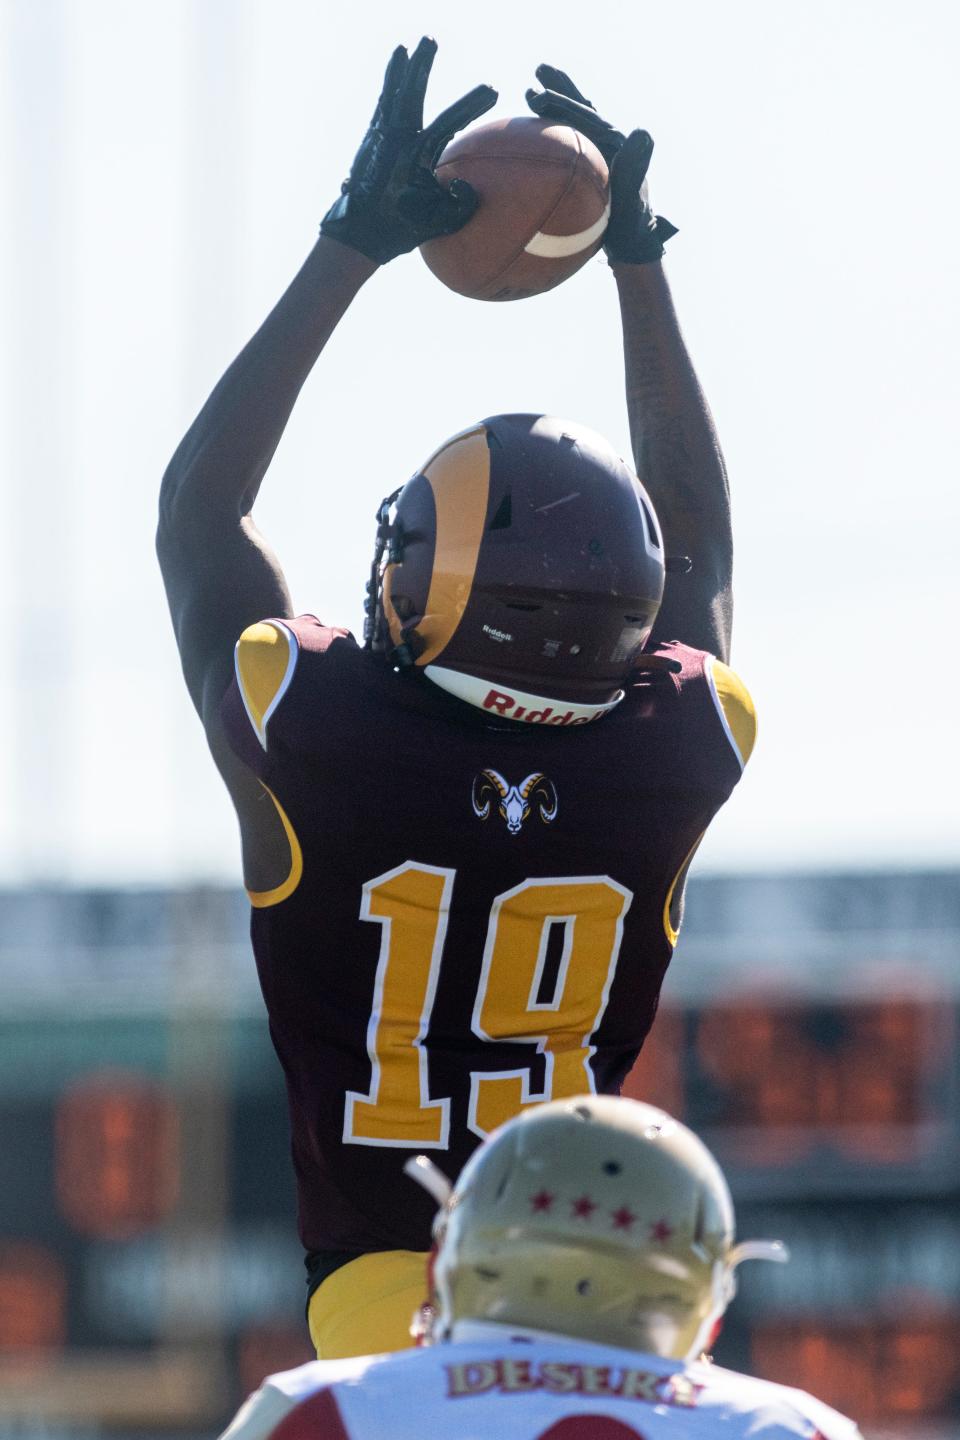 Victor Valley College's Omari McCullough pulls in a pass which he ran in for a touchdown against College of the Desert on Saturday, Nov. 12, 2022.